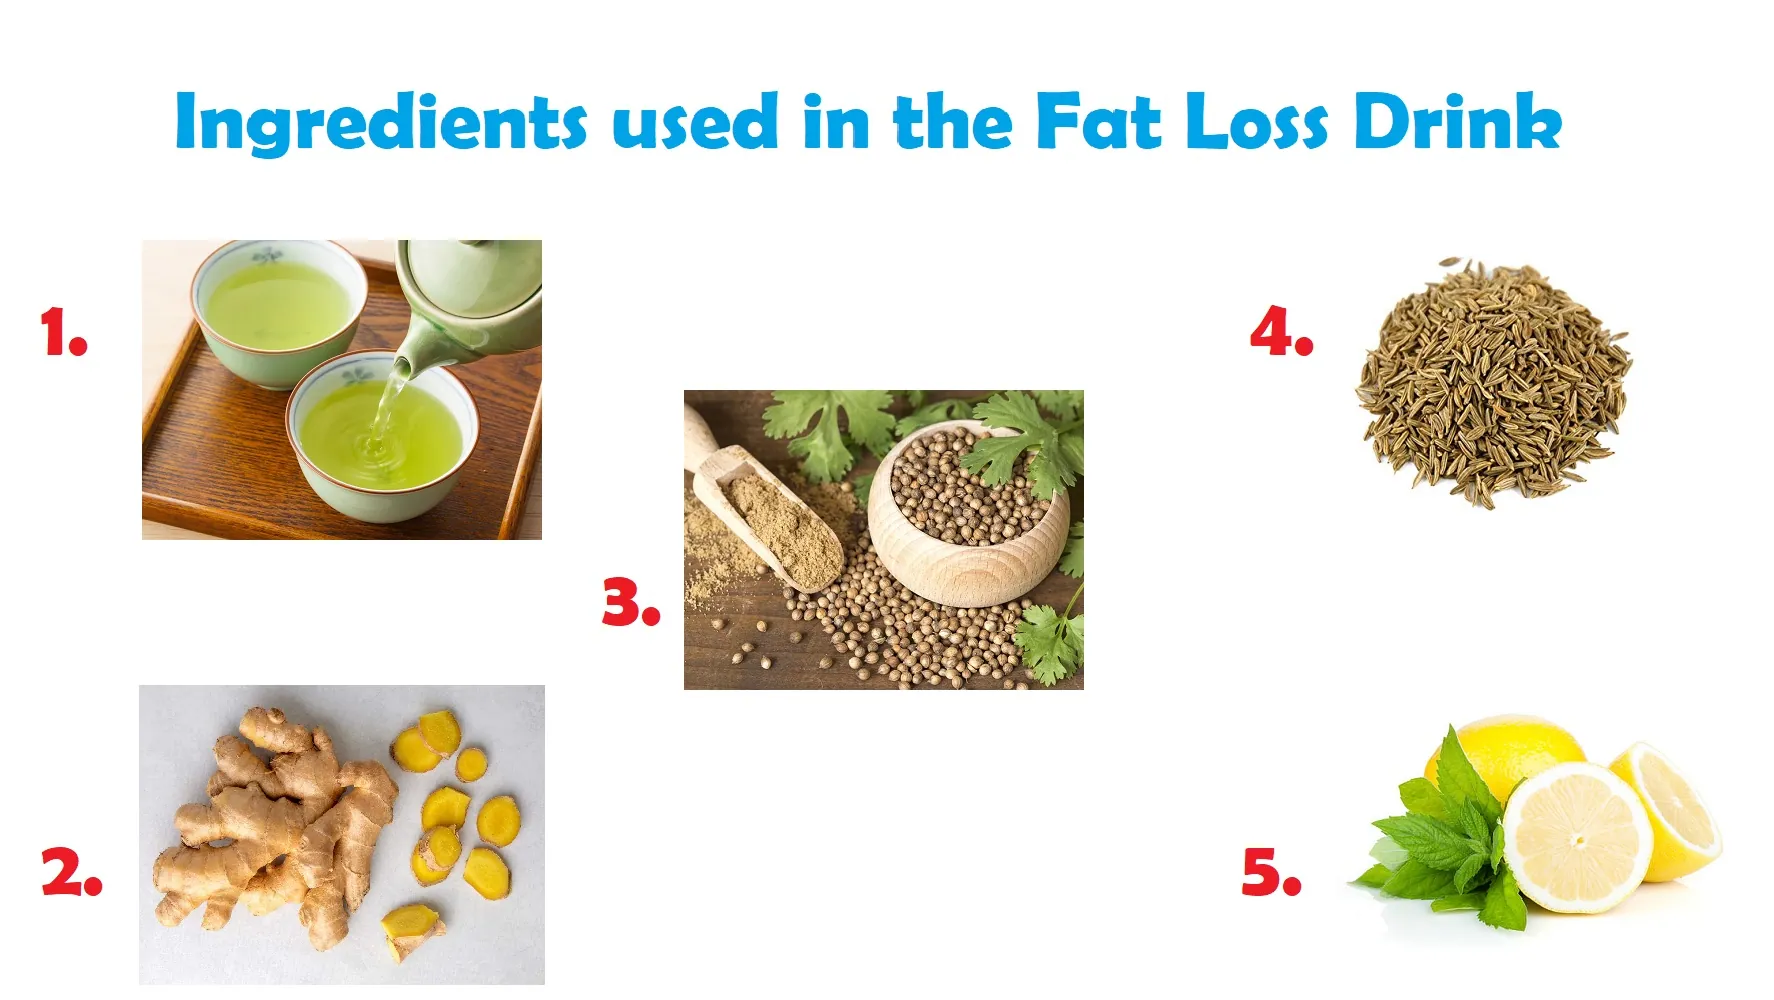 Fat Loss Ingredients: Green Tea, Ginger, and More!